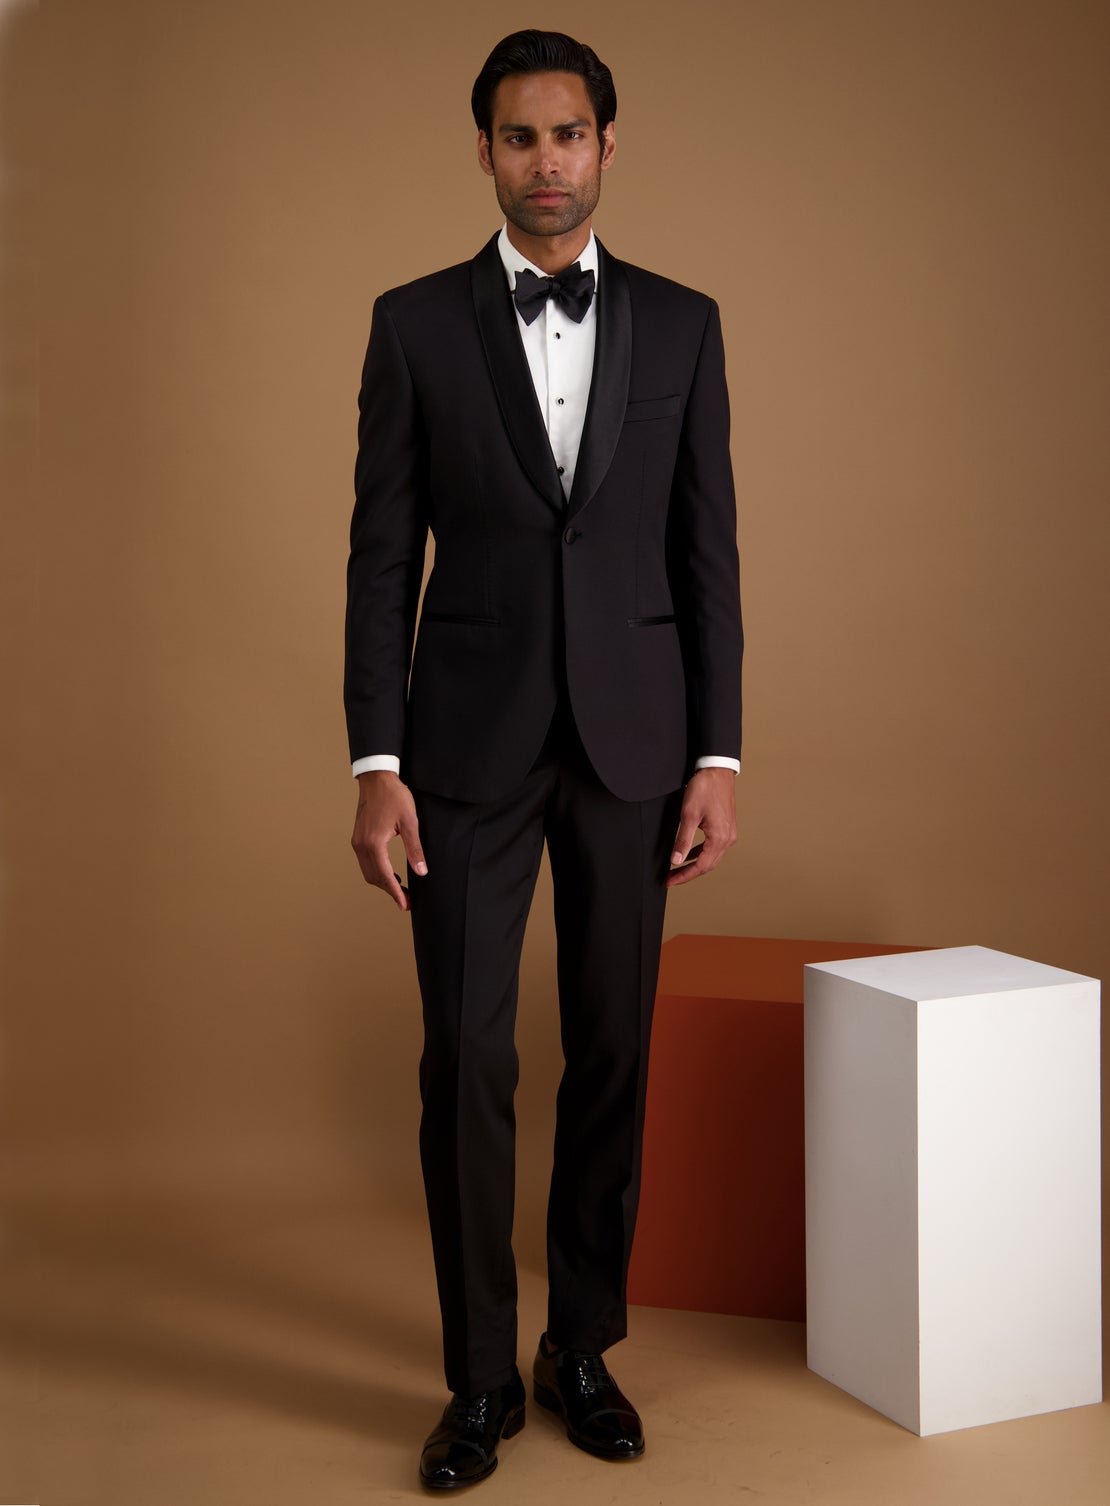 Seb Worsted Dinner Suit